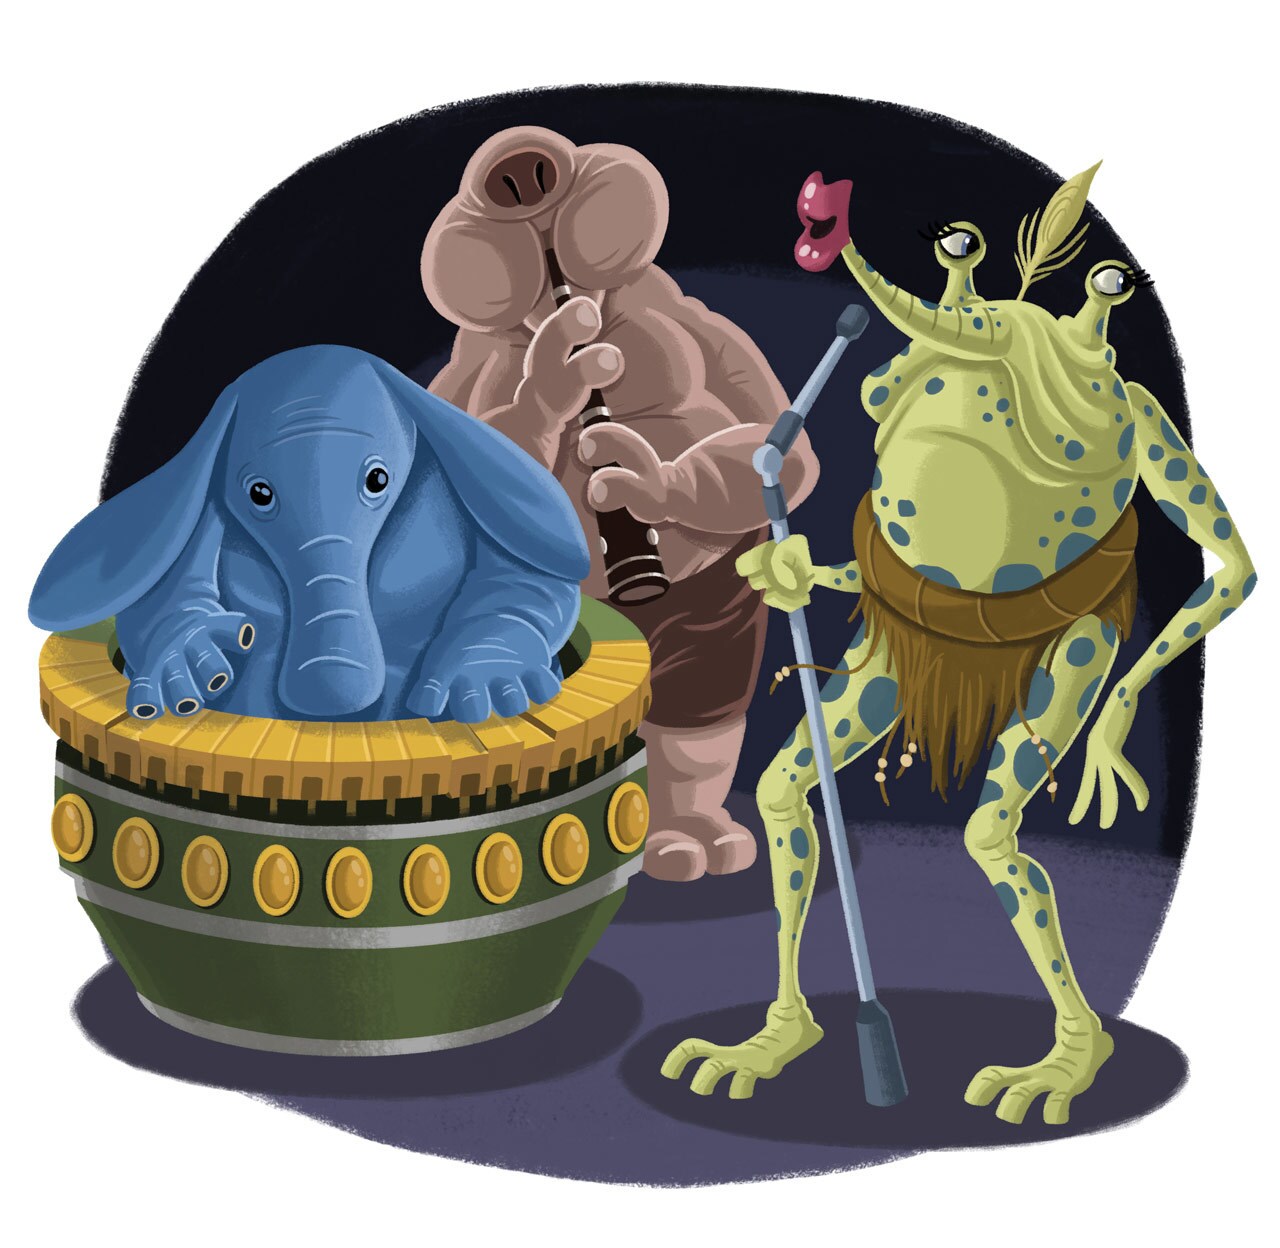 Max Rebo, Droopy McCool, and Sy Snootles of the Max Rebo Band perform in art from The Big Golden Book of Aliens, Creatures, and Beasts.